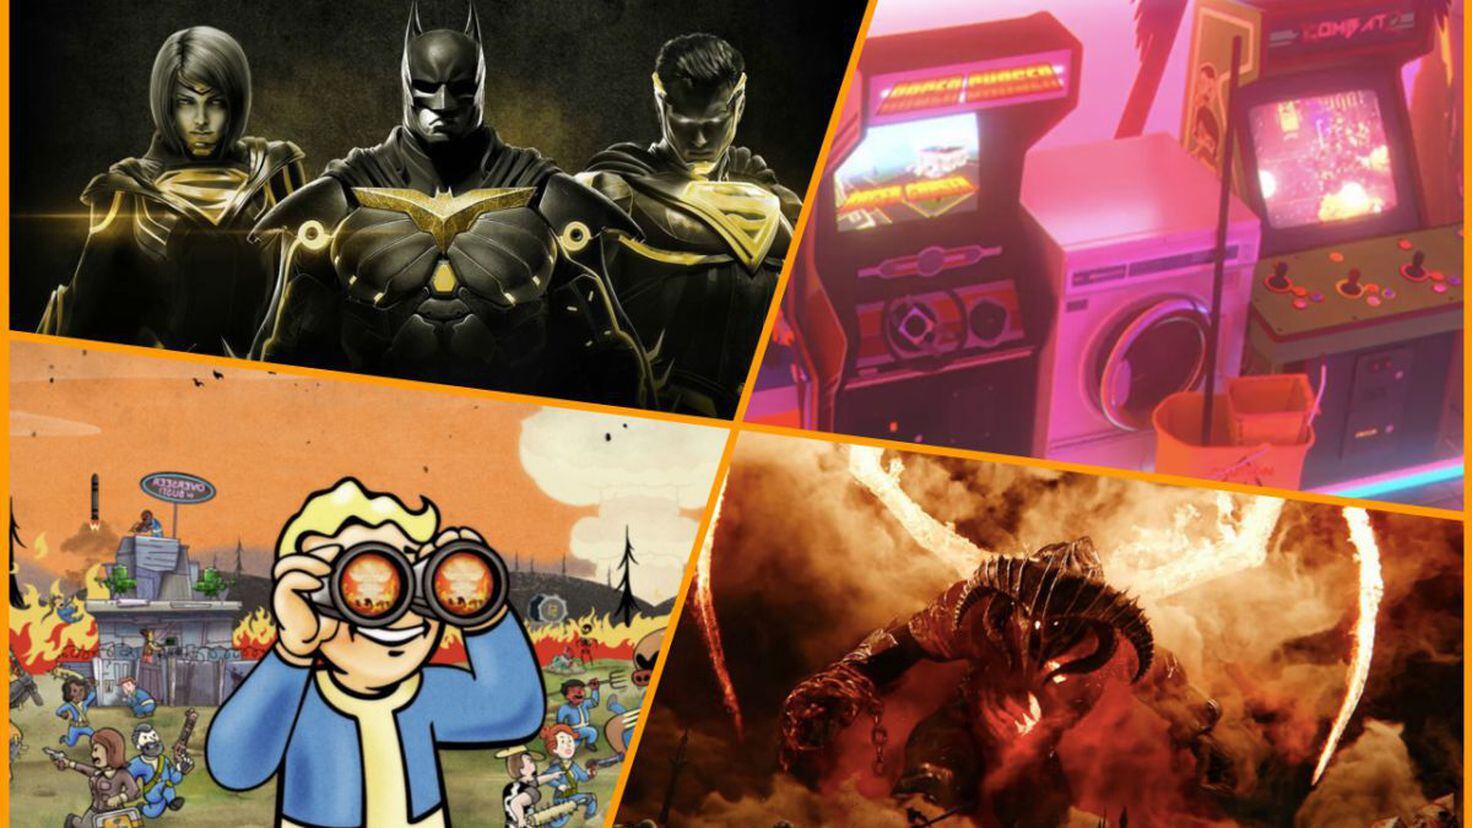 May 2022 free games on PS Plus, Xbox Gold, Prime Gaming and Stadia Pro -  Meristation